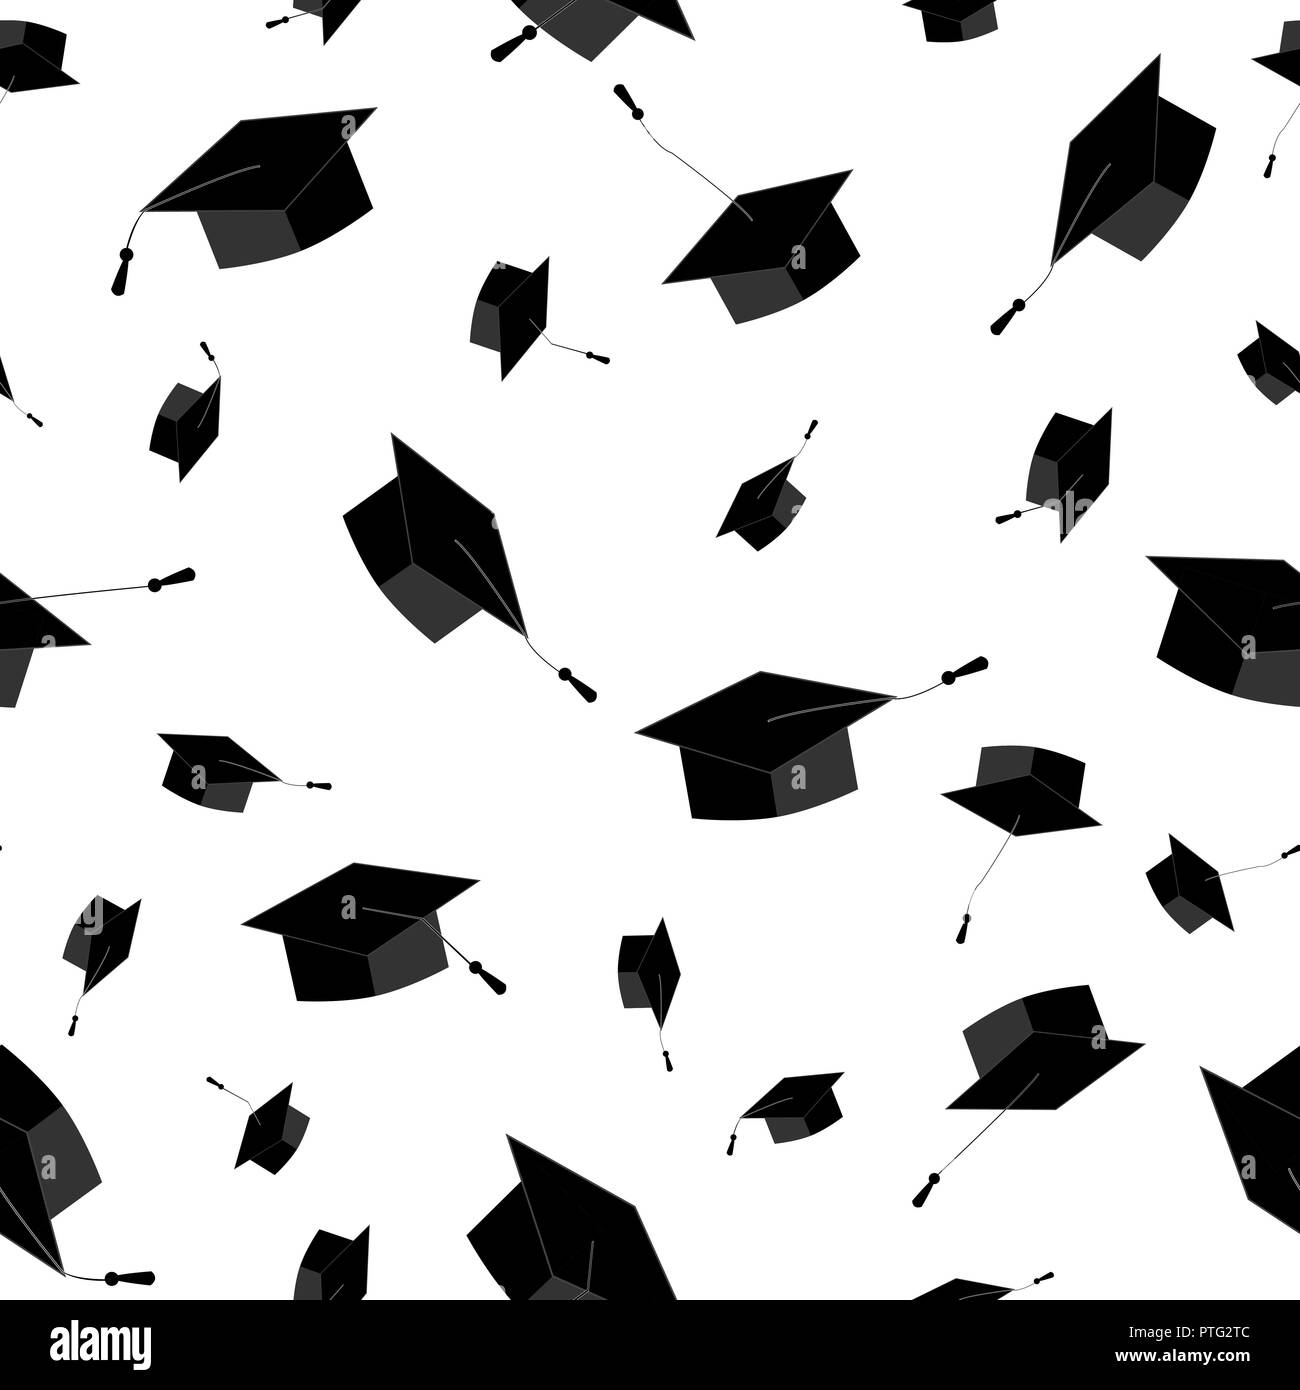 Graduation caps fly in the air in a moment of celebration. Seamless pattern. Vector illustration, black and white Stock Vector